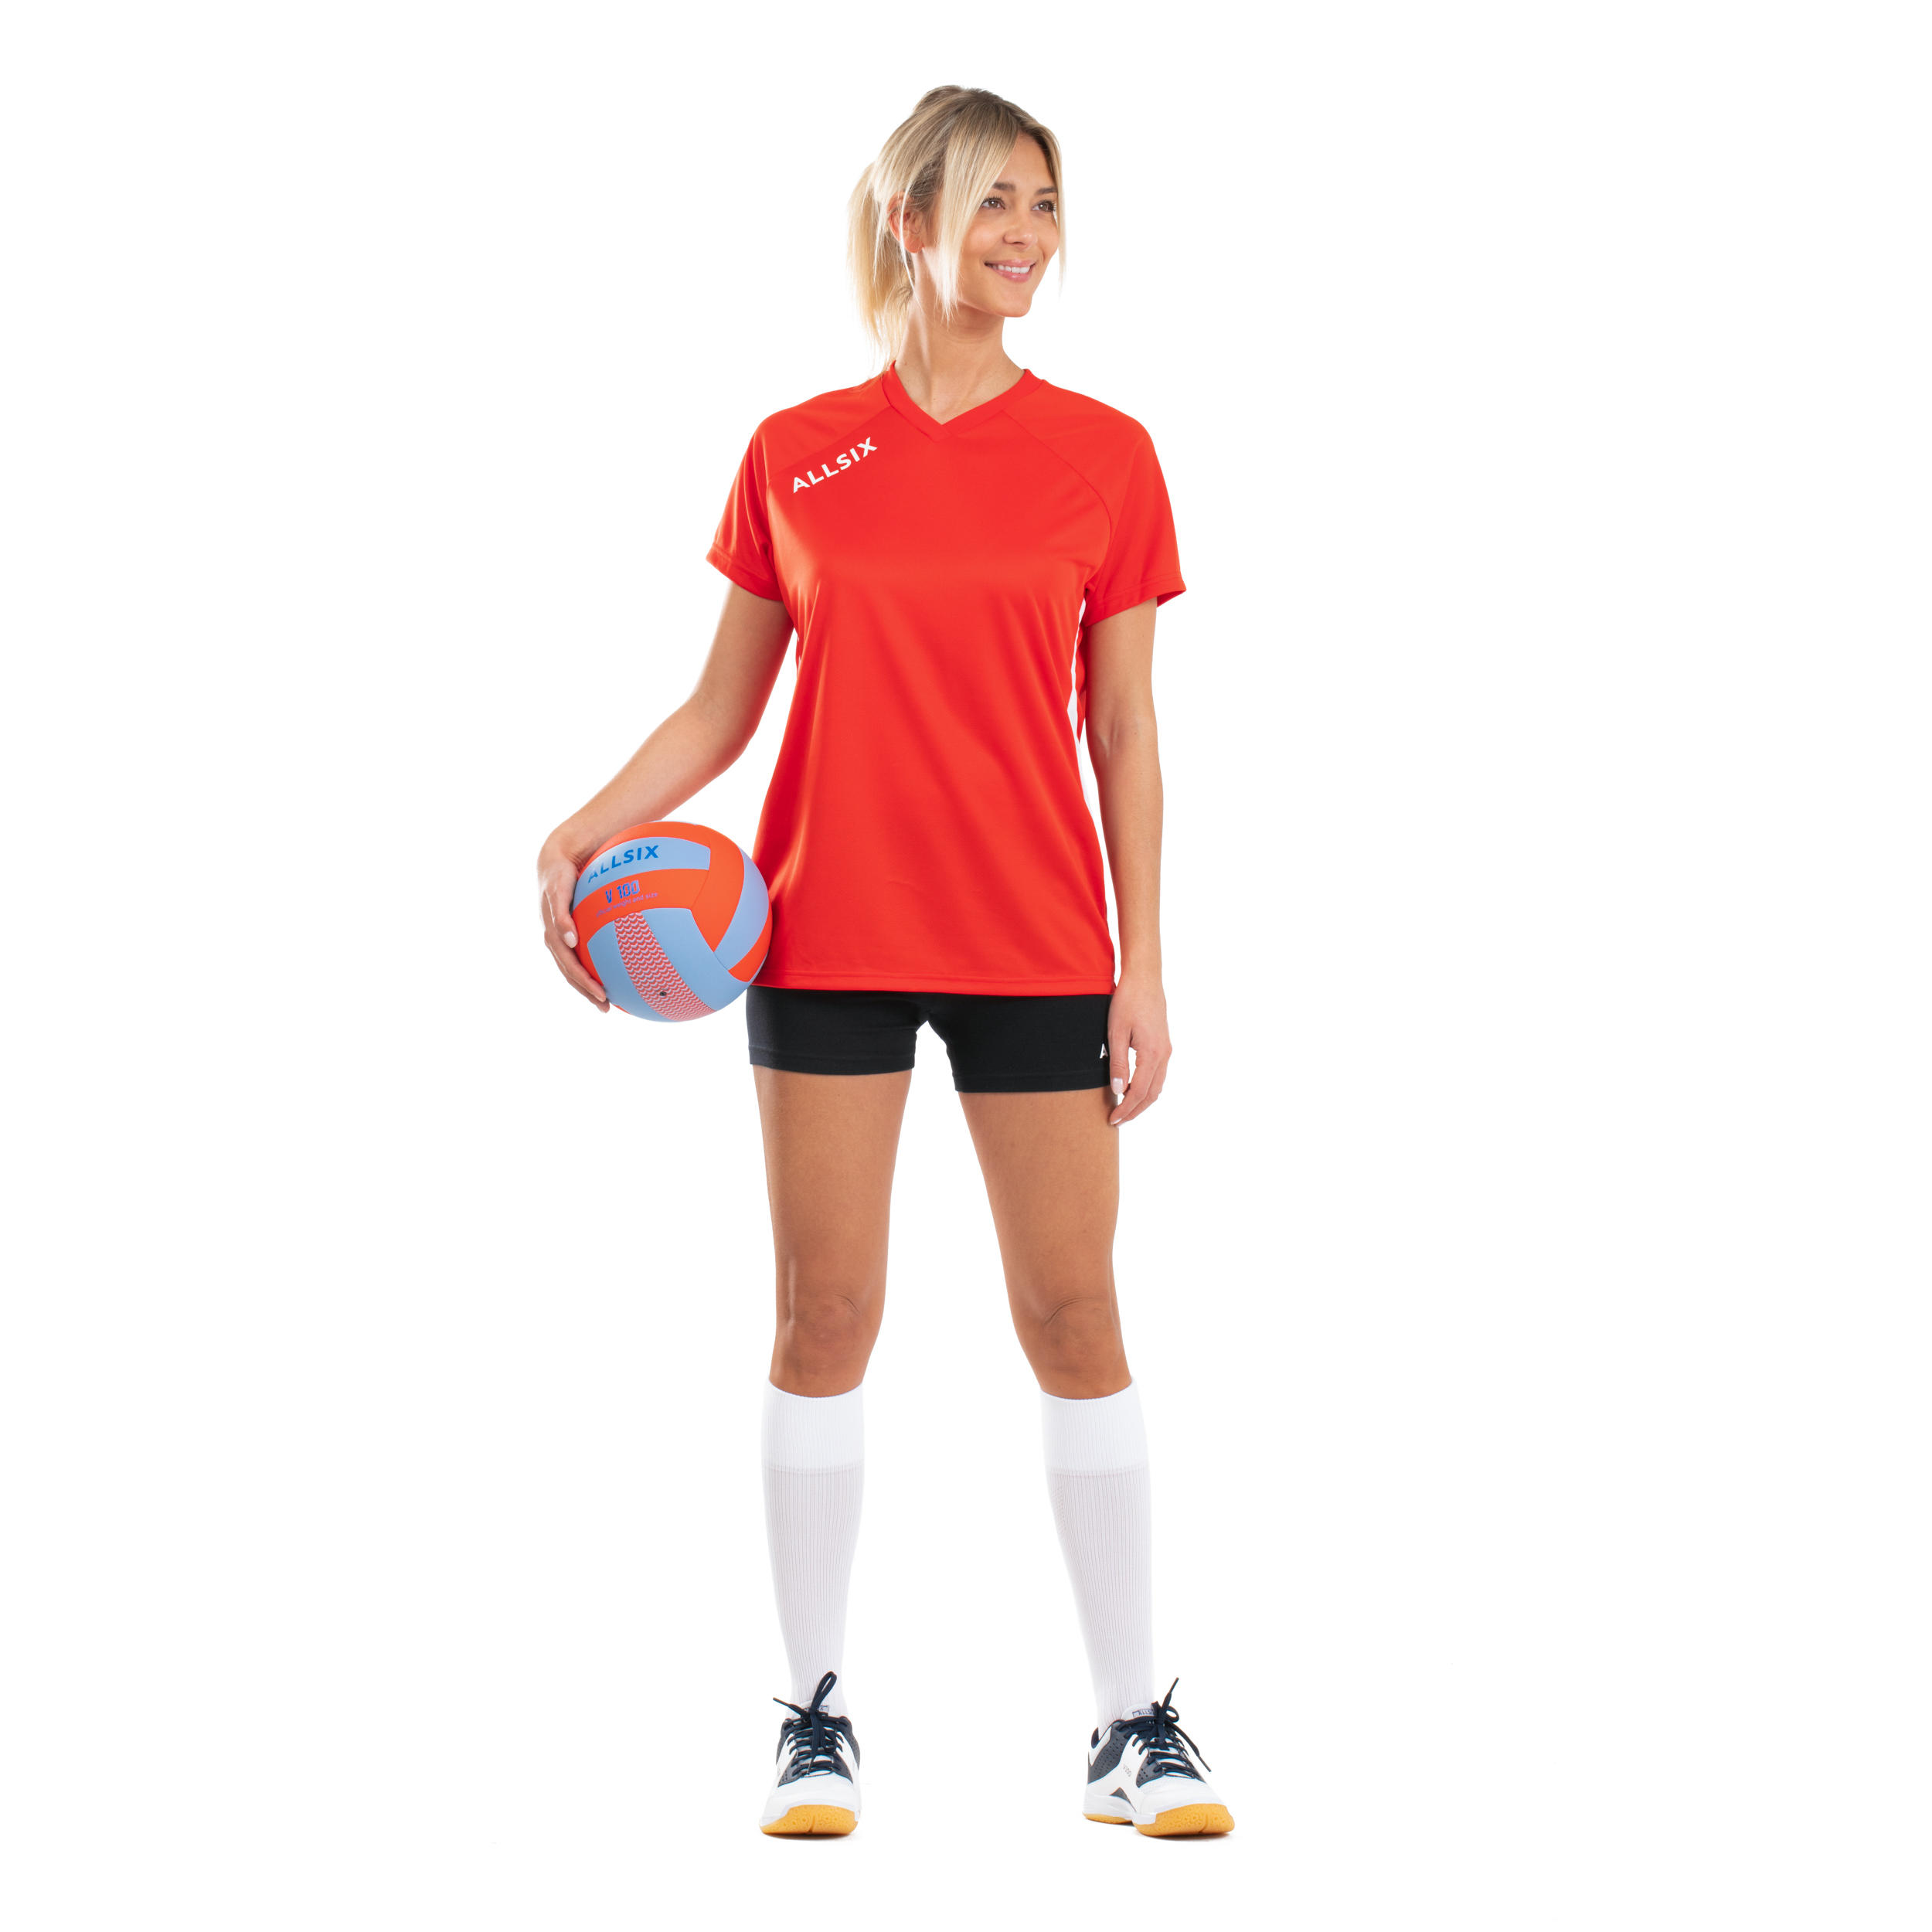 V100 Women's Volleyball Jersey - Red 8/8